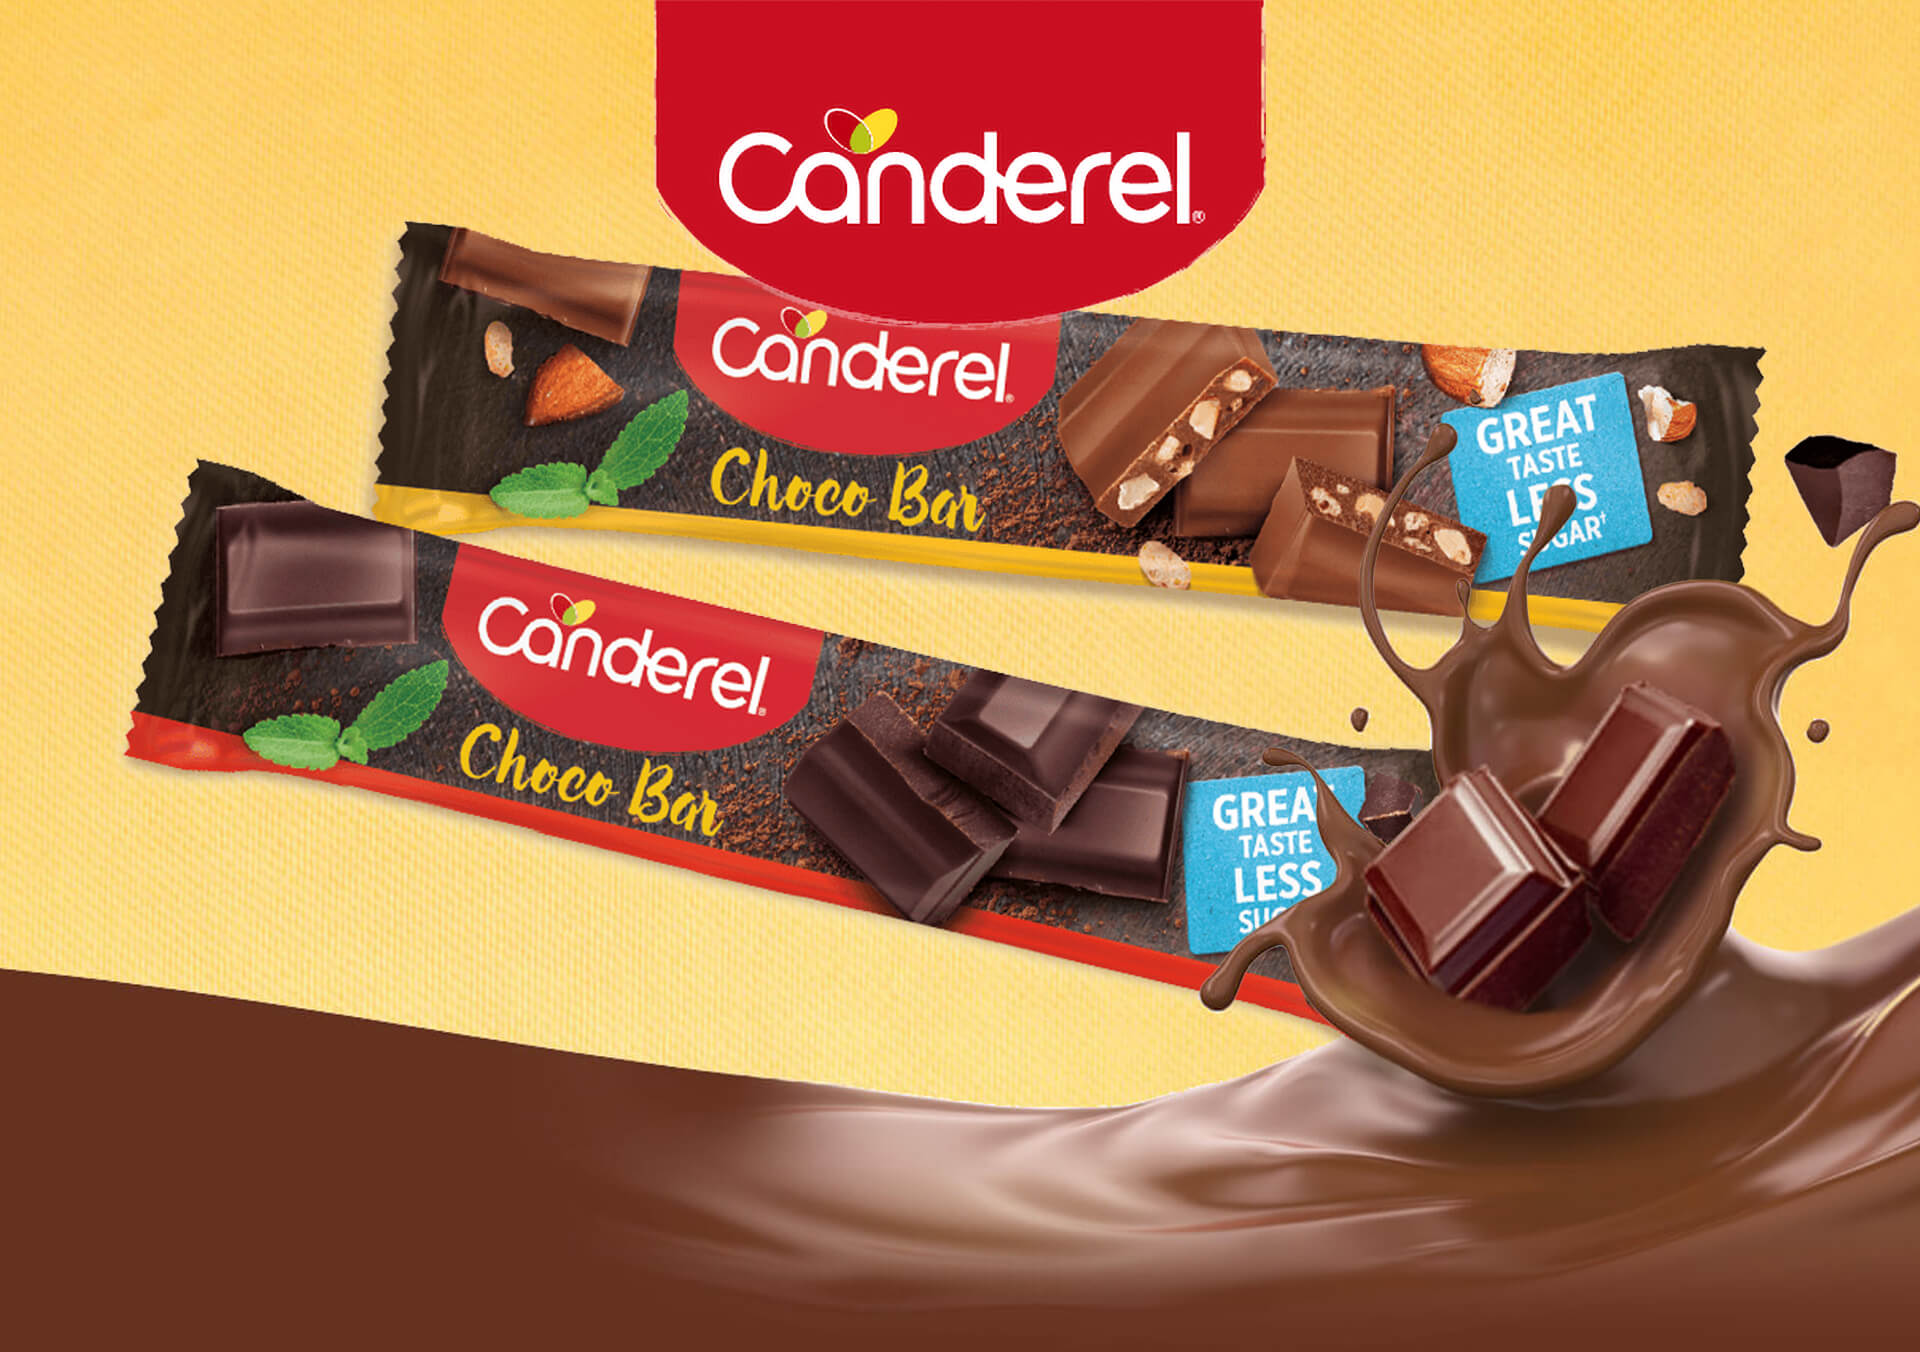 Canderel® Chocolate - More than a delicious taste